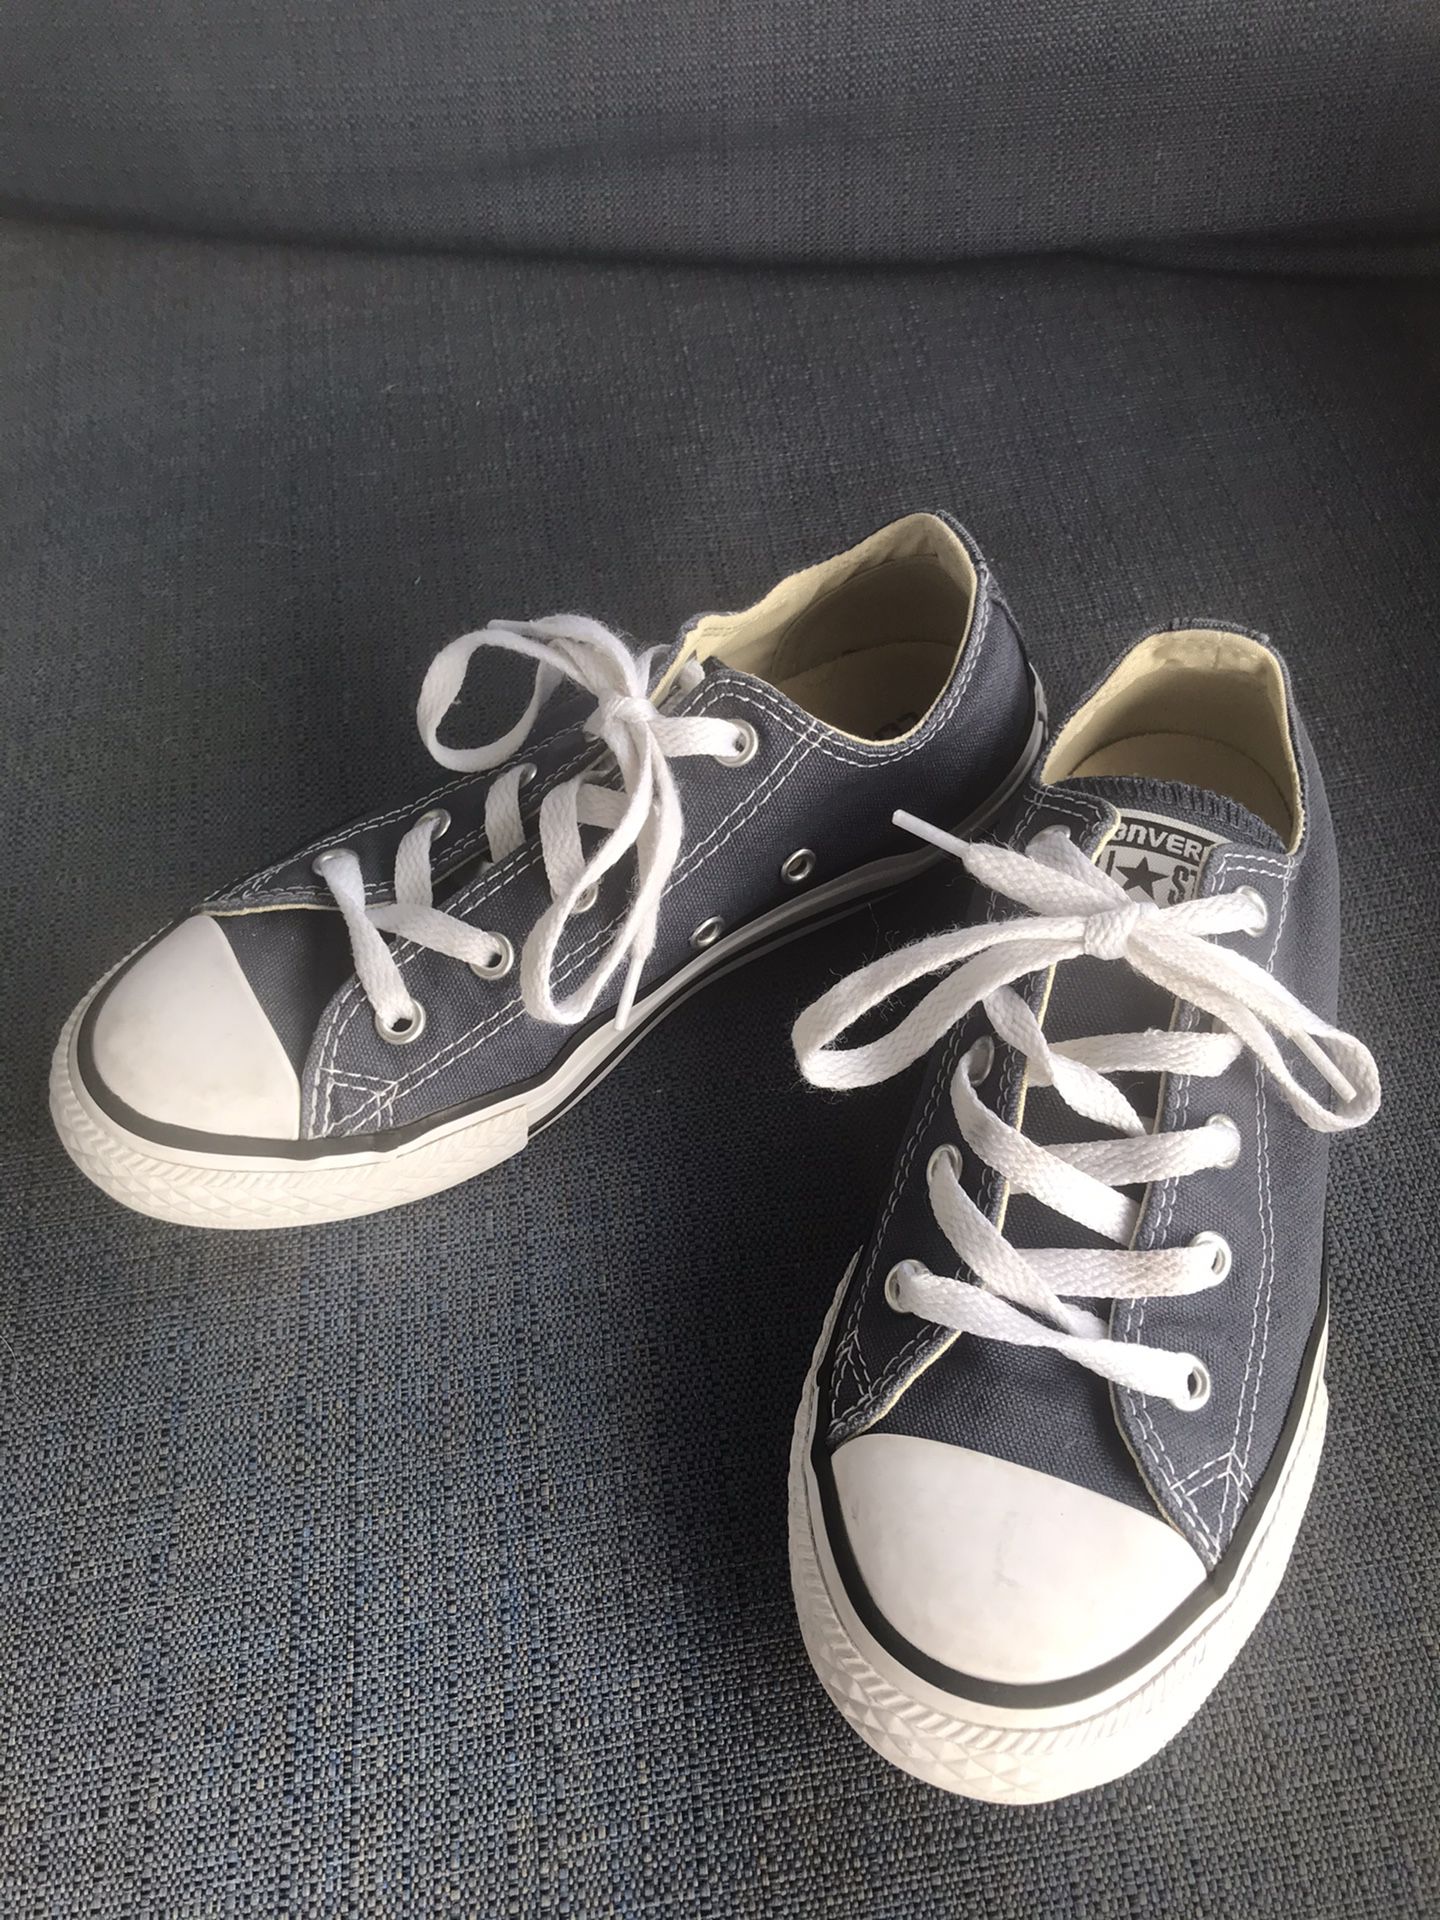 Converse all star low top sneaker